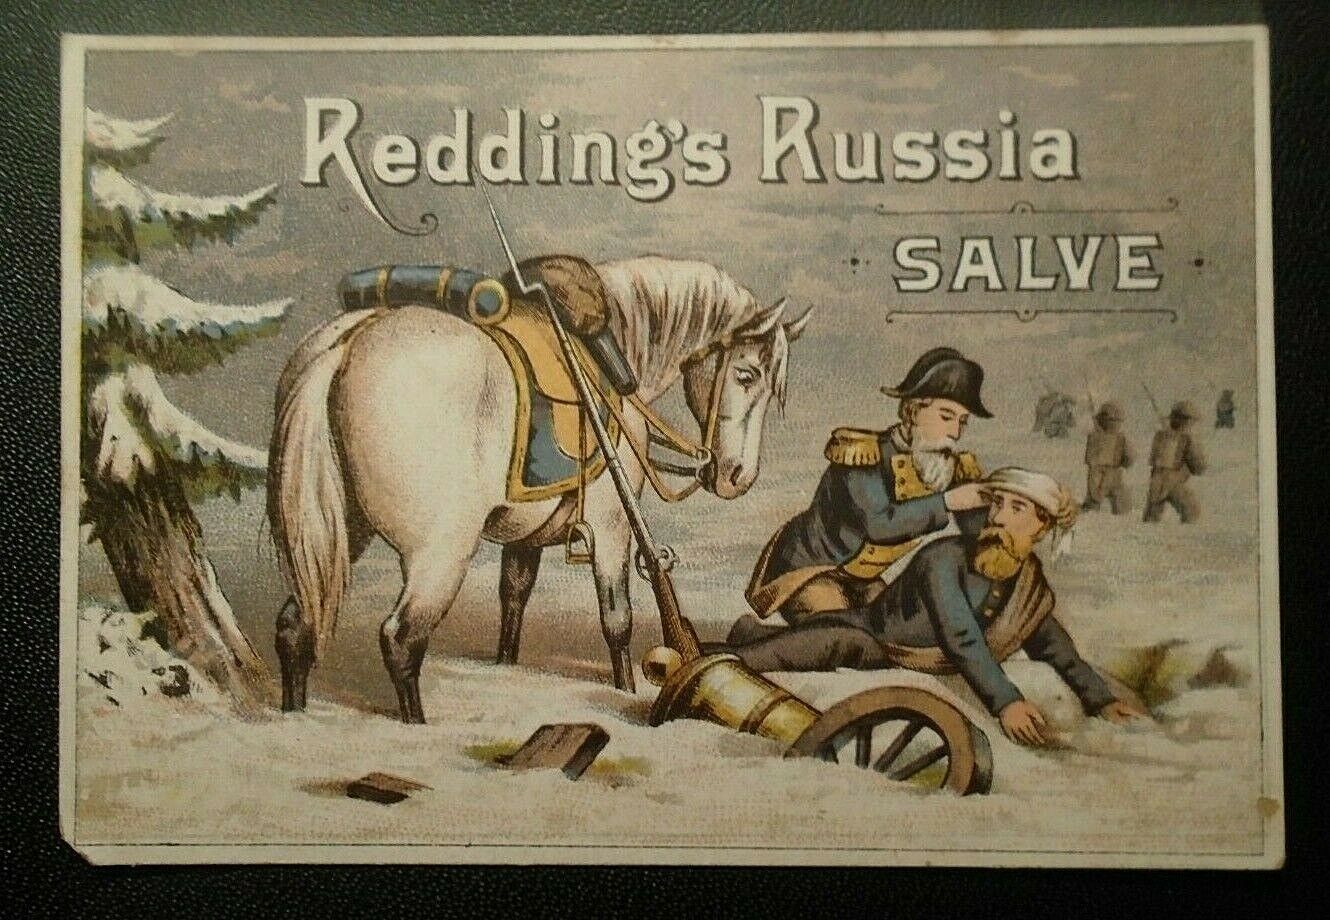 graphic  Victorian trade card advertising Redding's Russia Salve